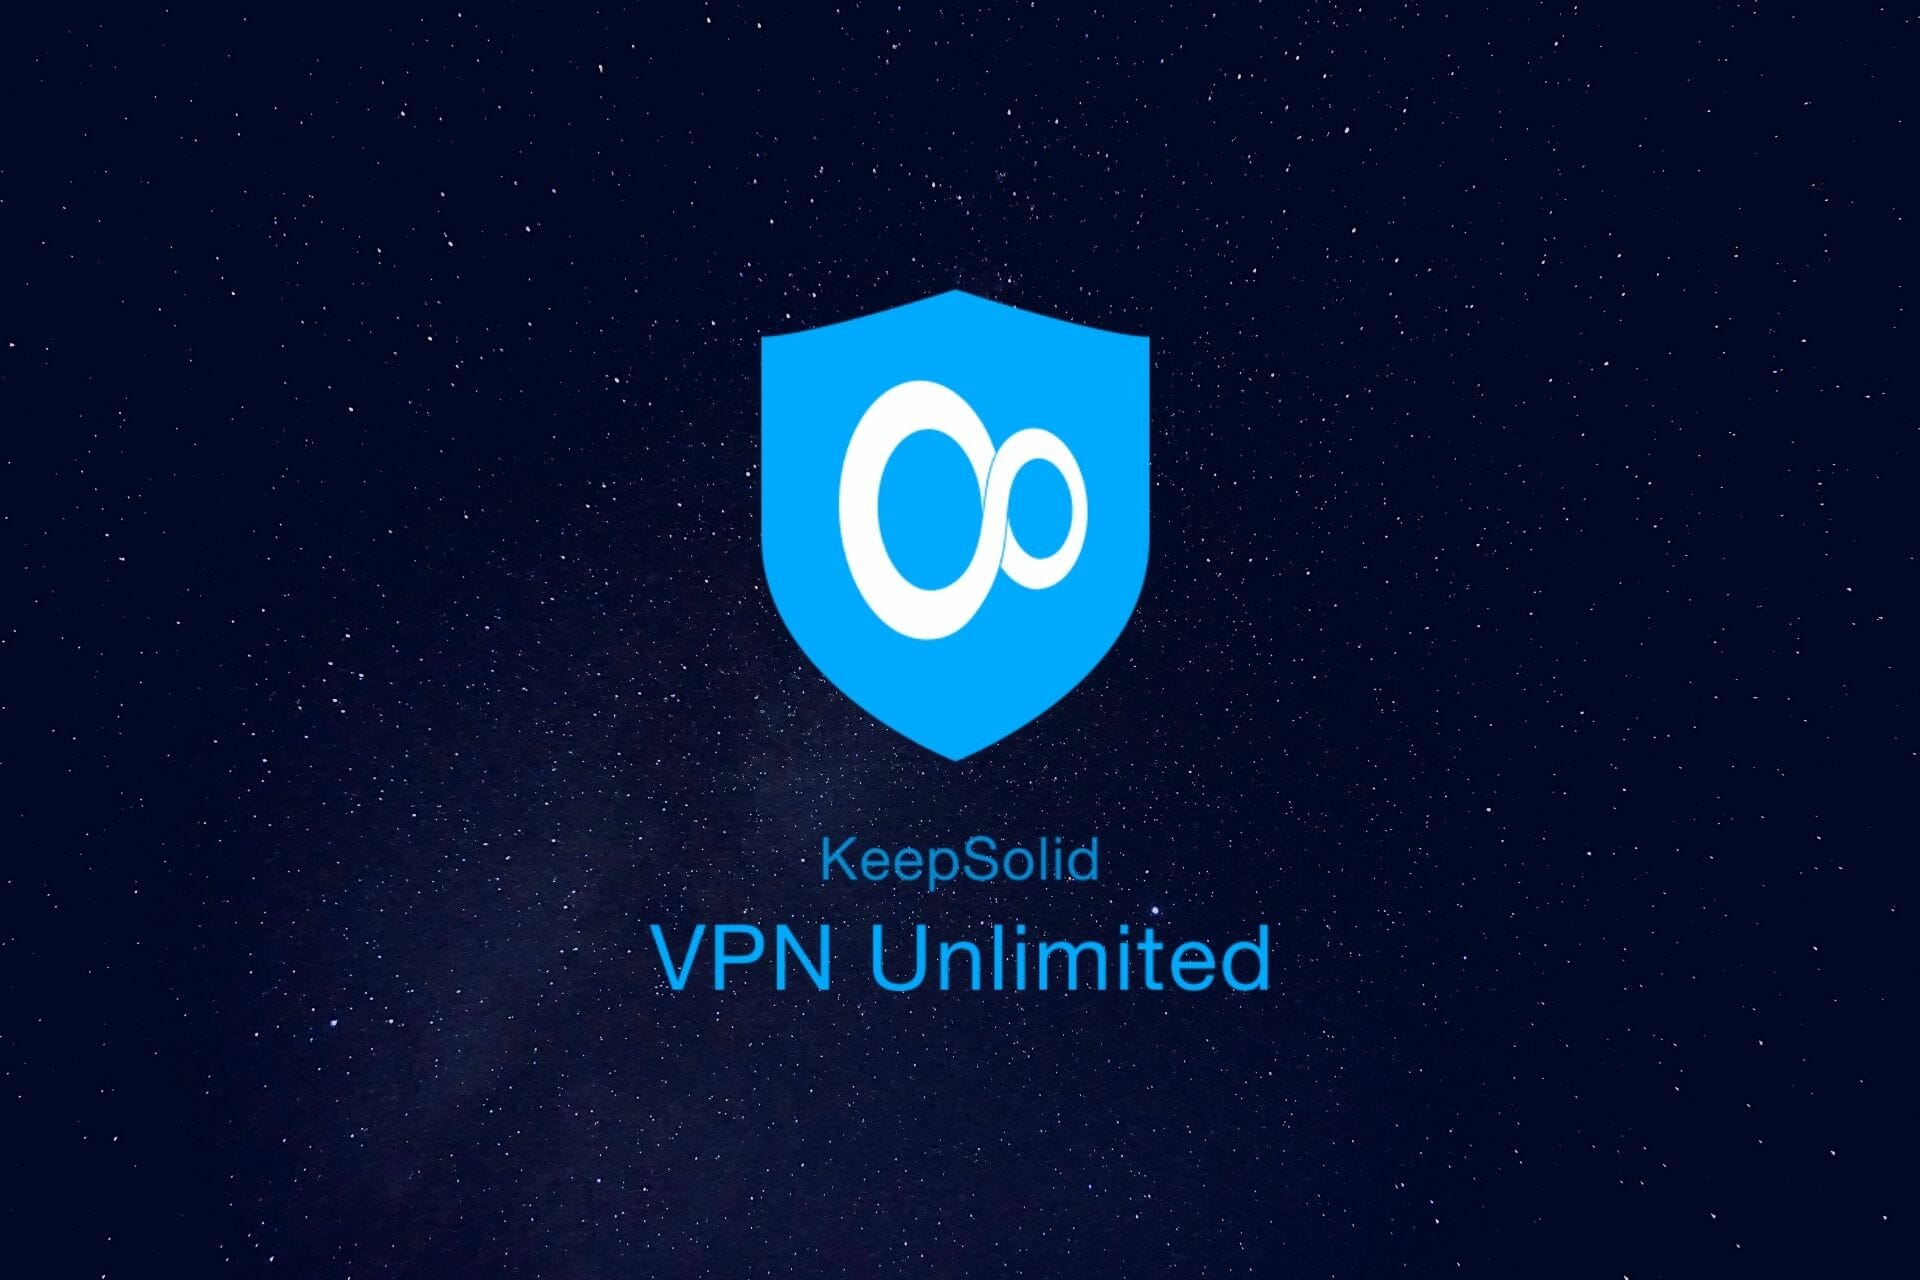 How to configure KeepSolid VPN Unlimited on Windows 10 PCs